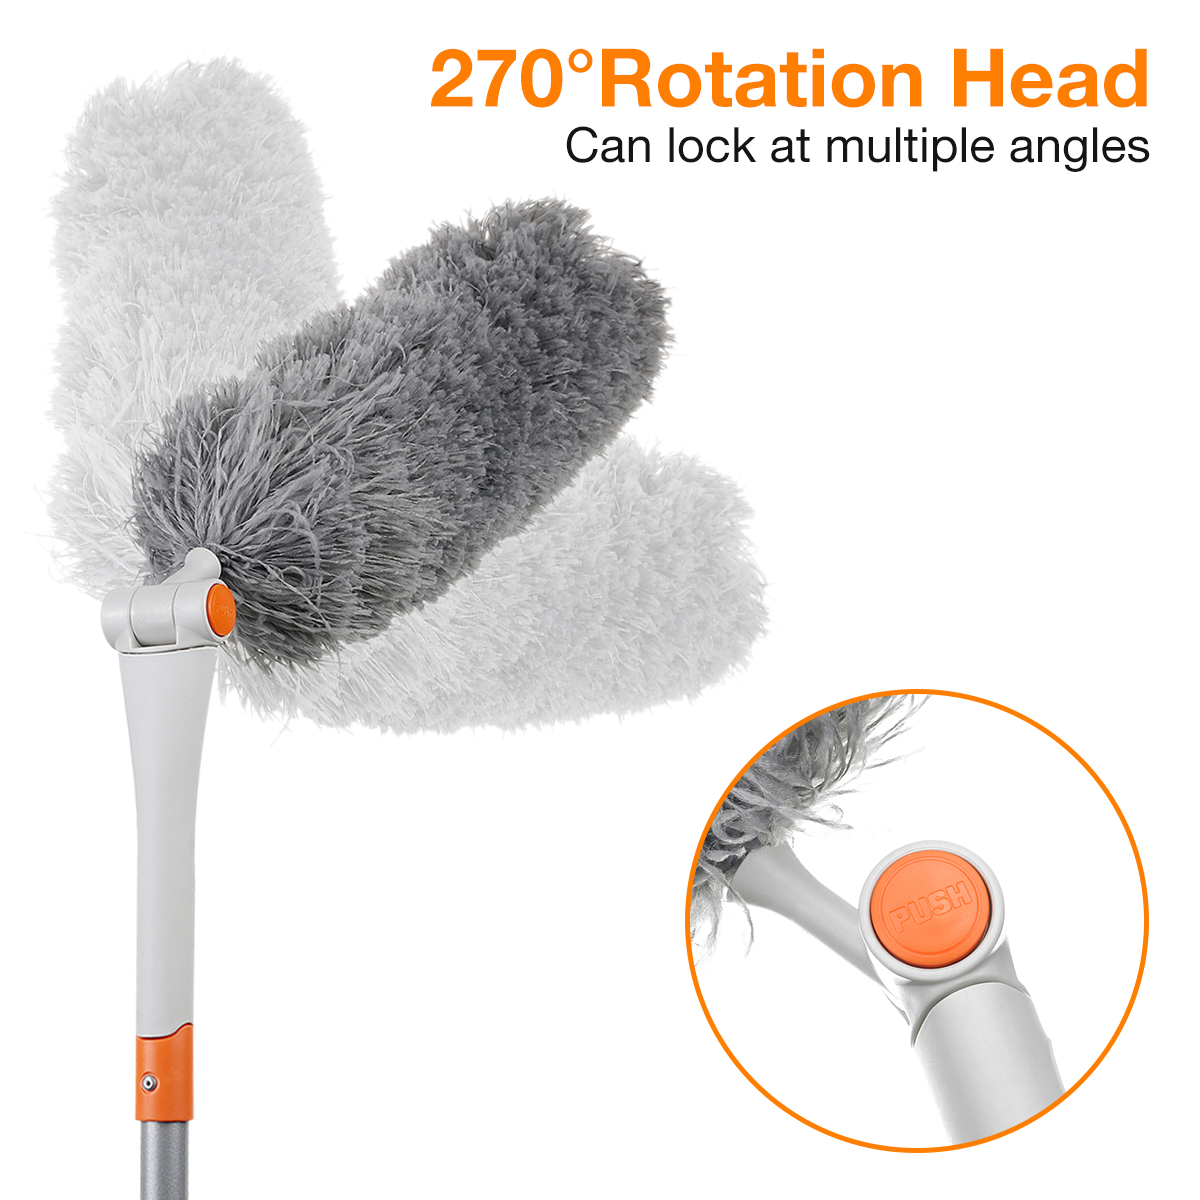 MATCC-Microfiber-Feather-Dusters-with-270deg-Rotation-Head-Extension-Pole-for-Cleaning-Tool-1878218-4